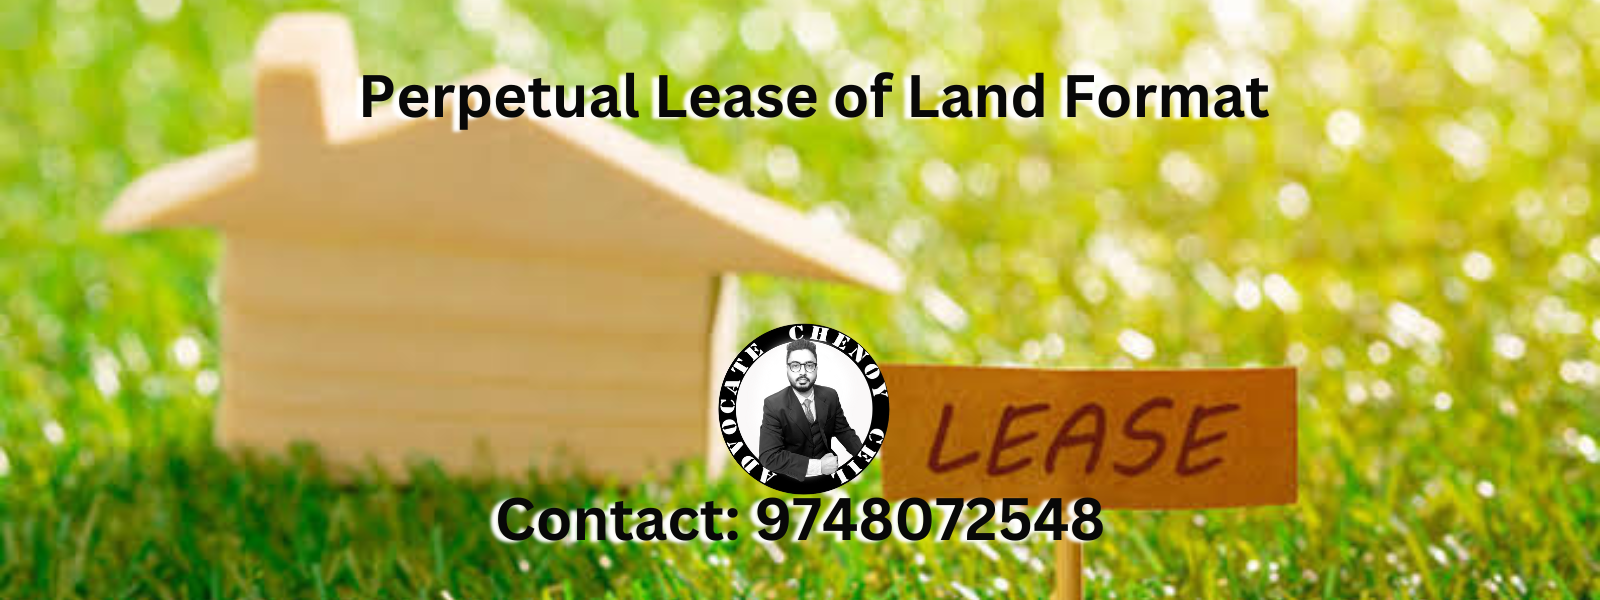 Perpetual Lease of a Land Format